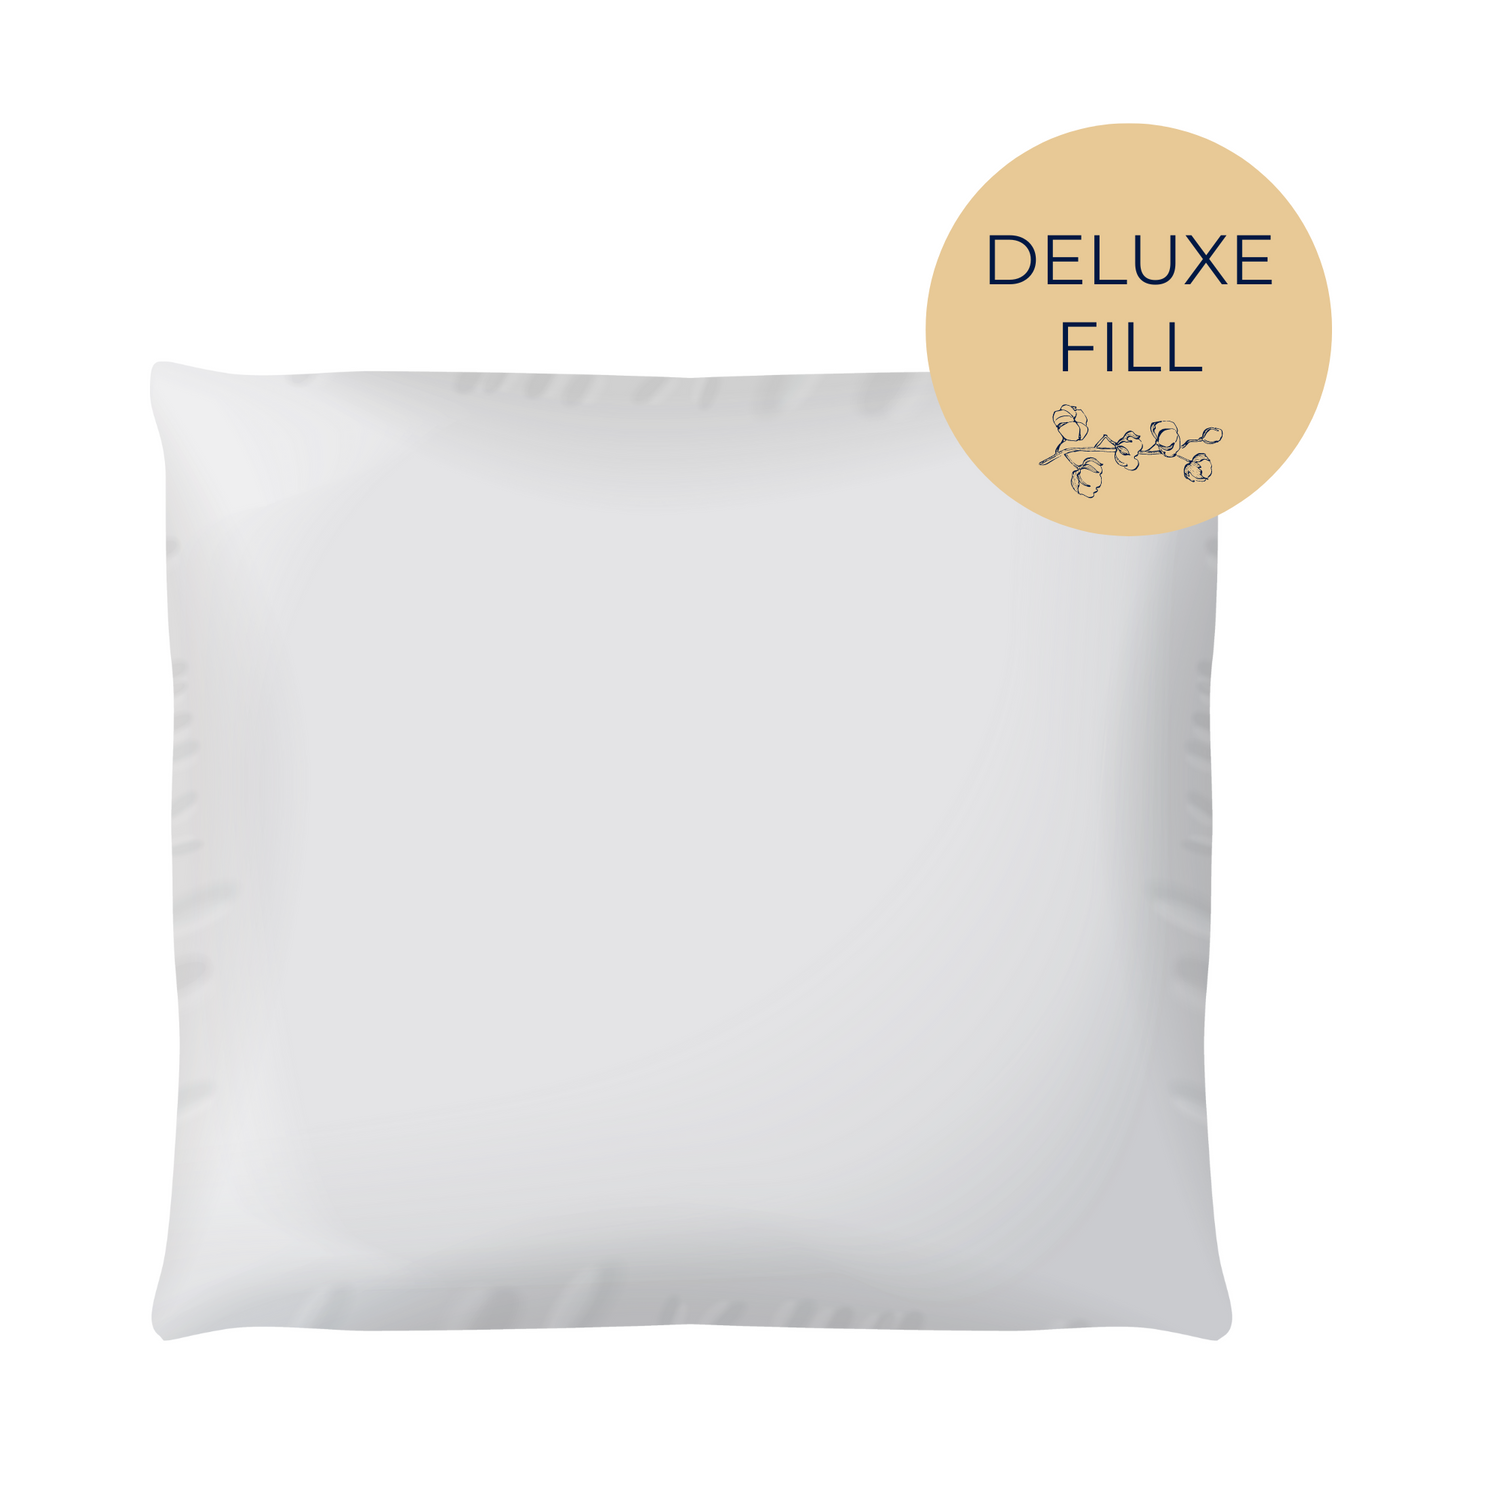 Pillow Inserts, Decorative Throw Pillow Core, Hypoallergenic